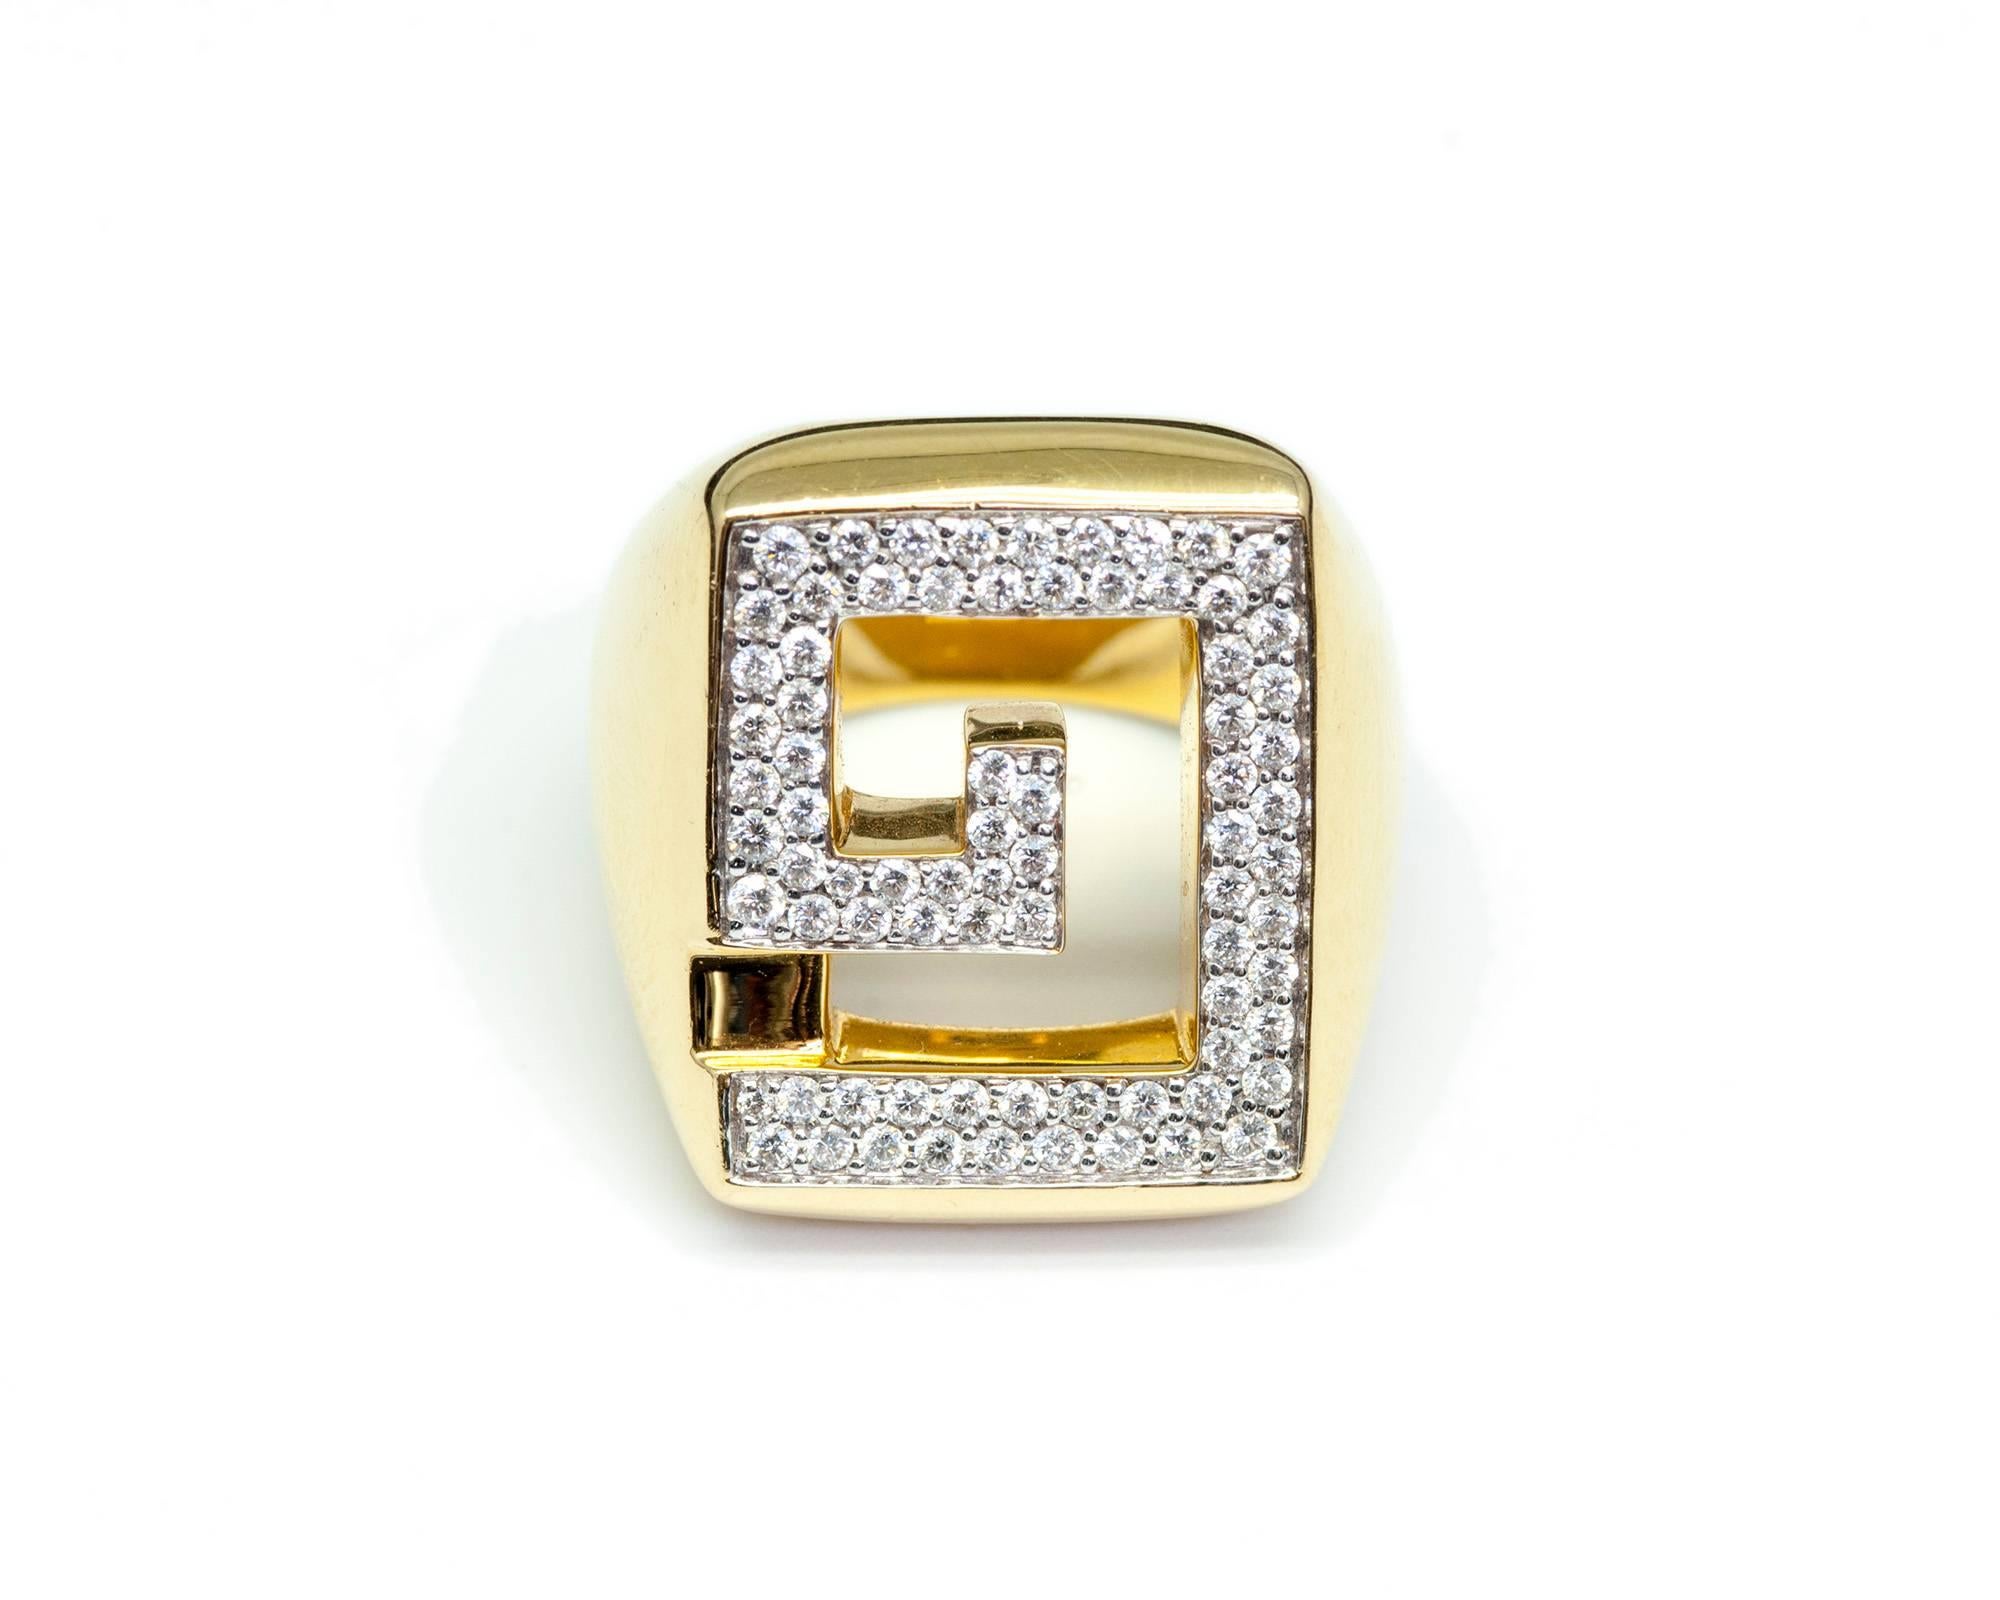 The Stenmark Greek Key cocktail ring in 18 karat yellow gold and 0.70 carats of G colour VS1 diamonds is a design of sensuous and bold volume, with a reference to the classic motif from antiquity. The high polish of the 18 karat gold and the